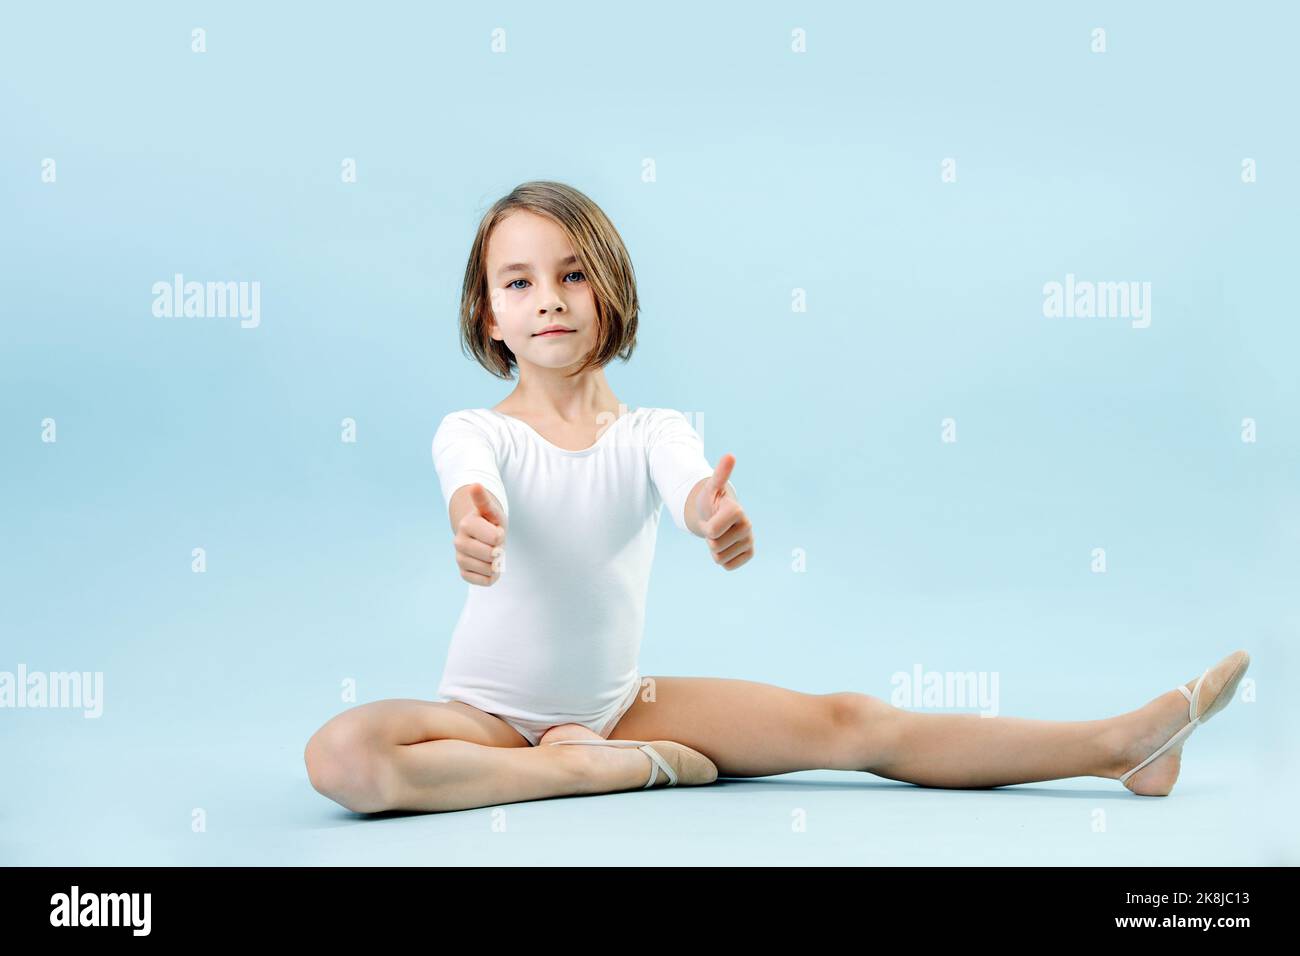 Tired girl in a white leotard sitting in half splits, giving thumbs up, looking at the camera. Over blue background. Stock Photo